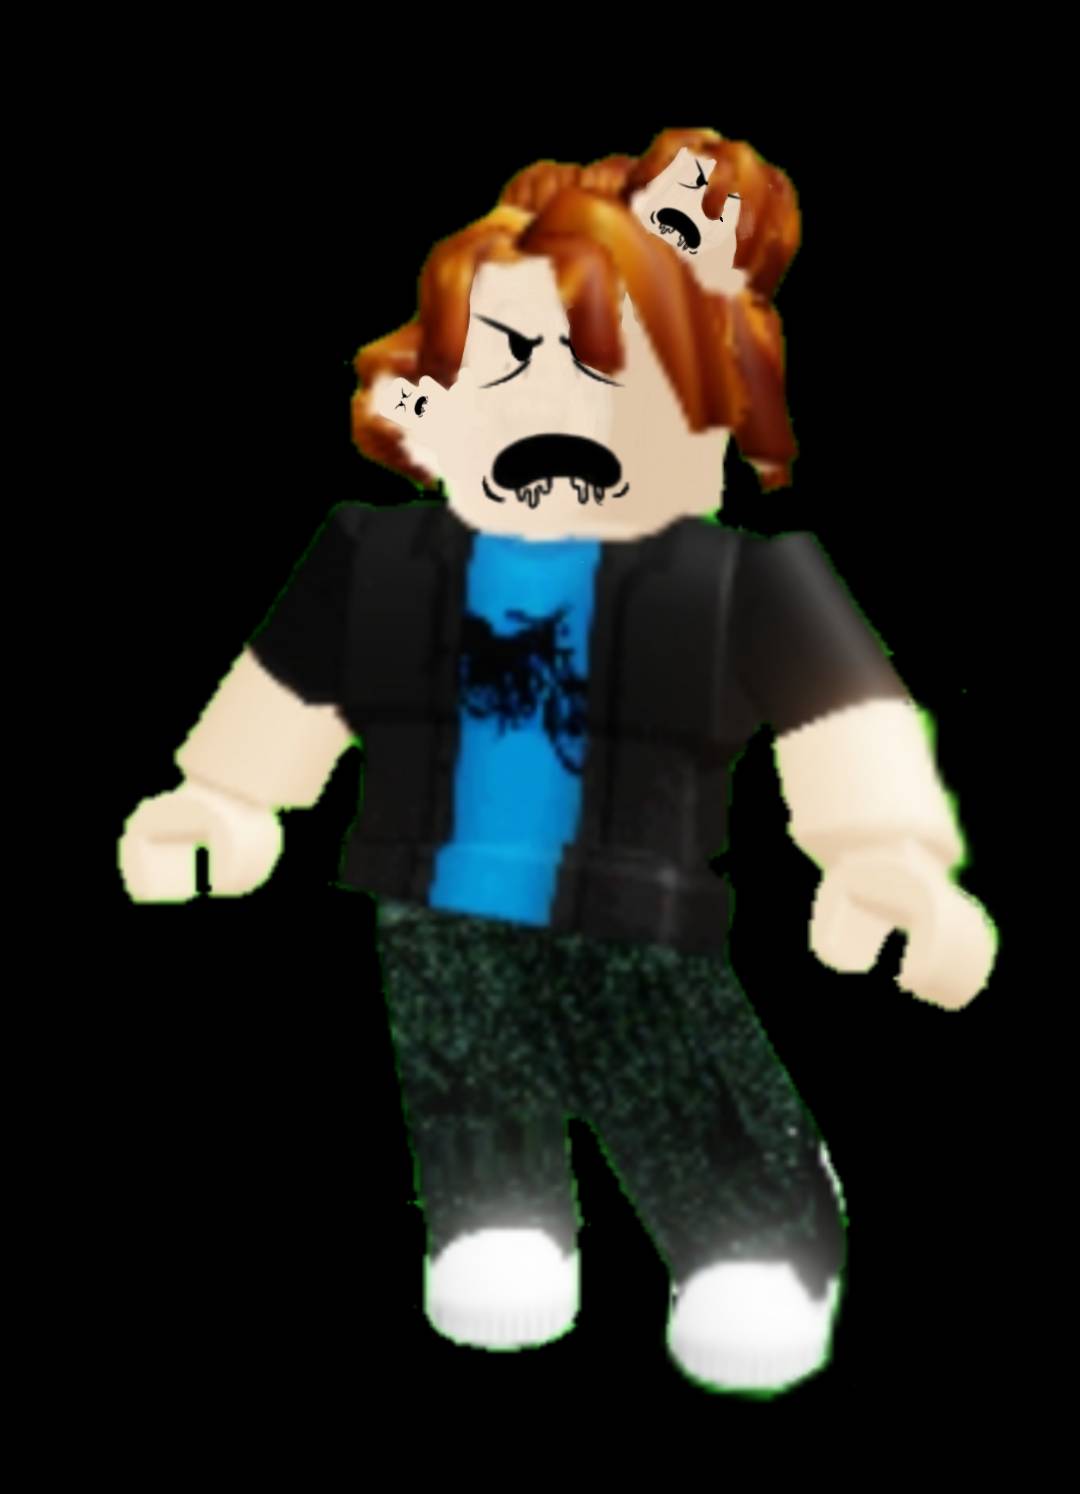 Roblox-bacon-hair by guy28479 on DeviantArt